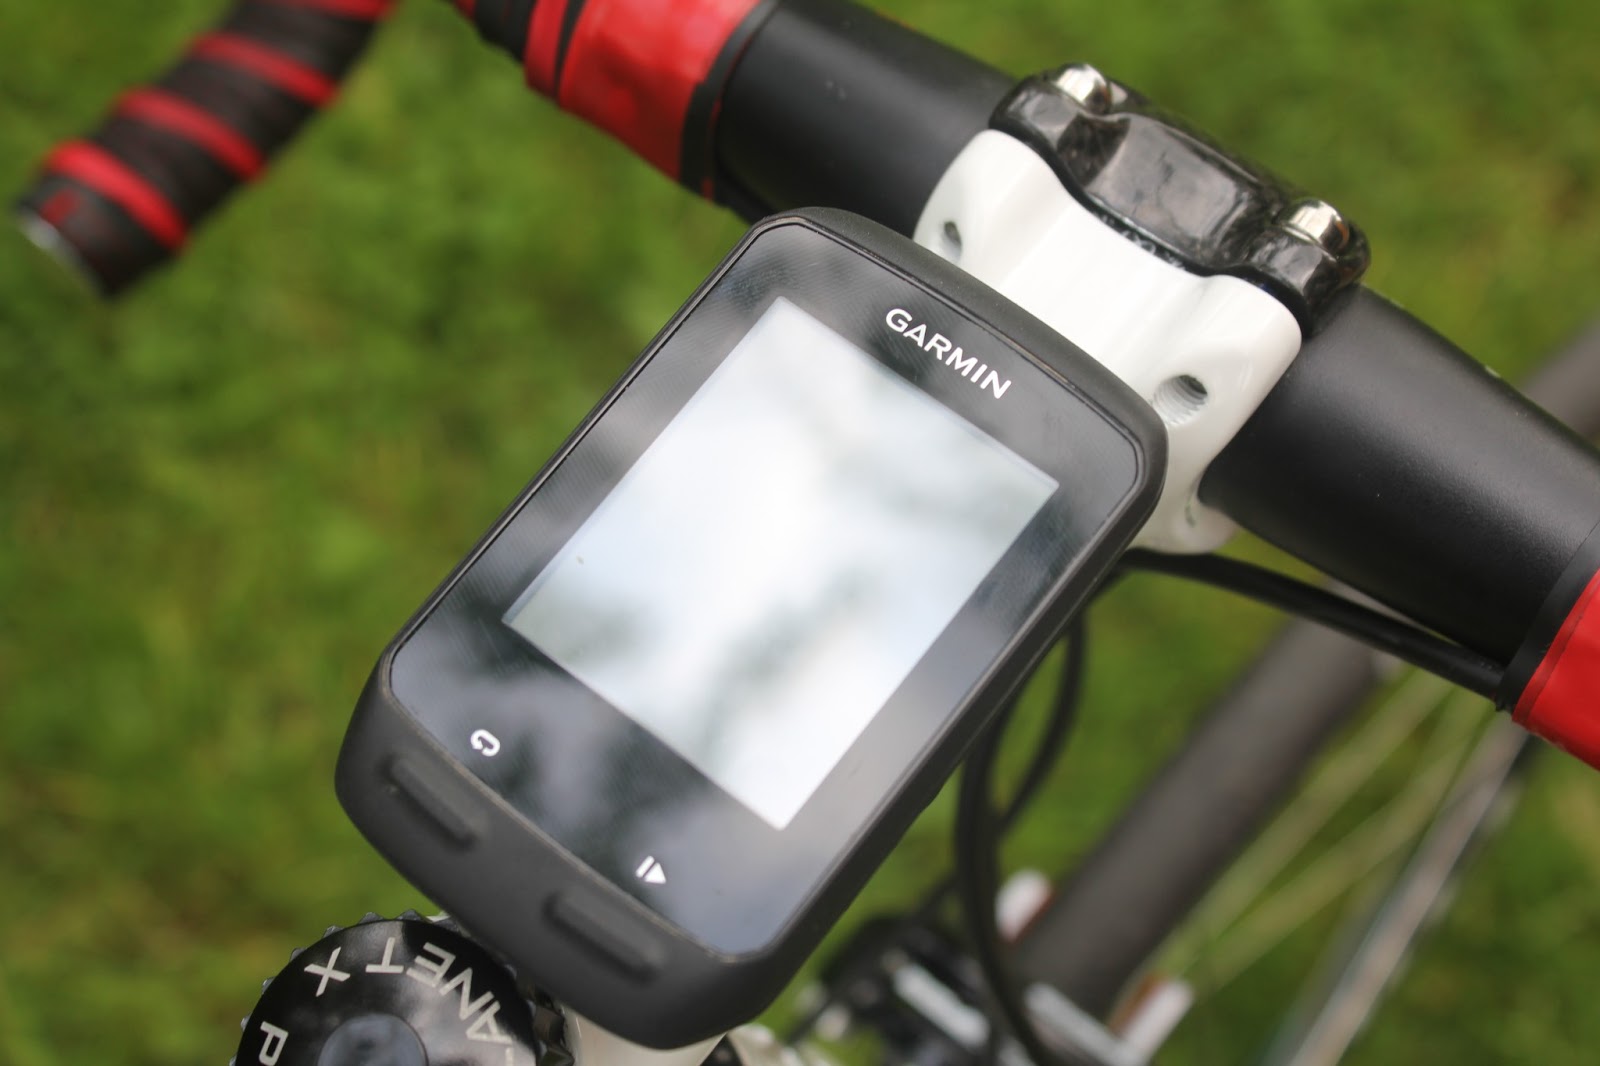 Training: The Advantages of Training With GPS